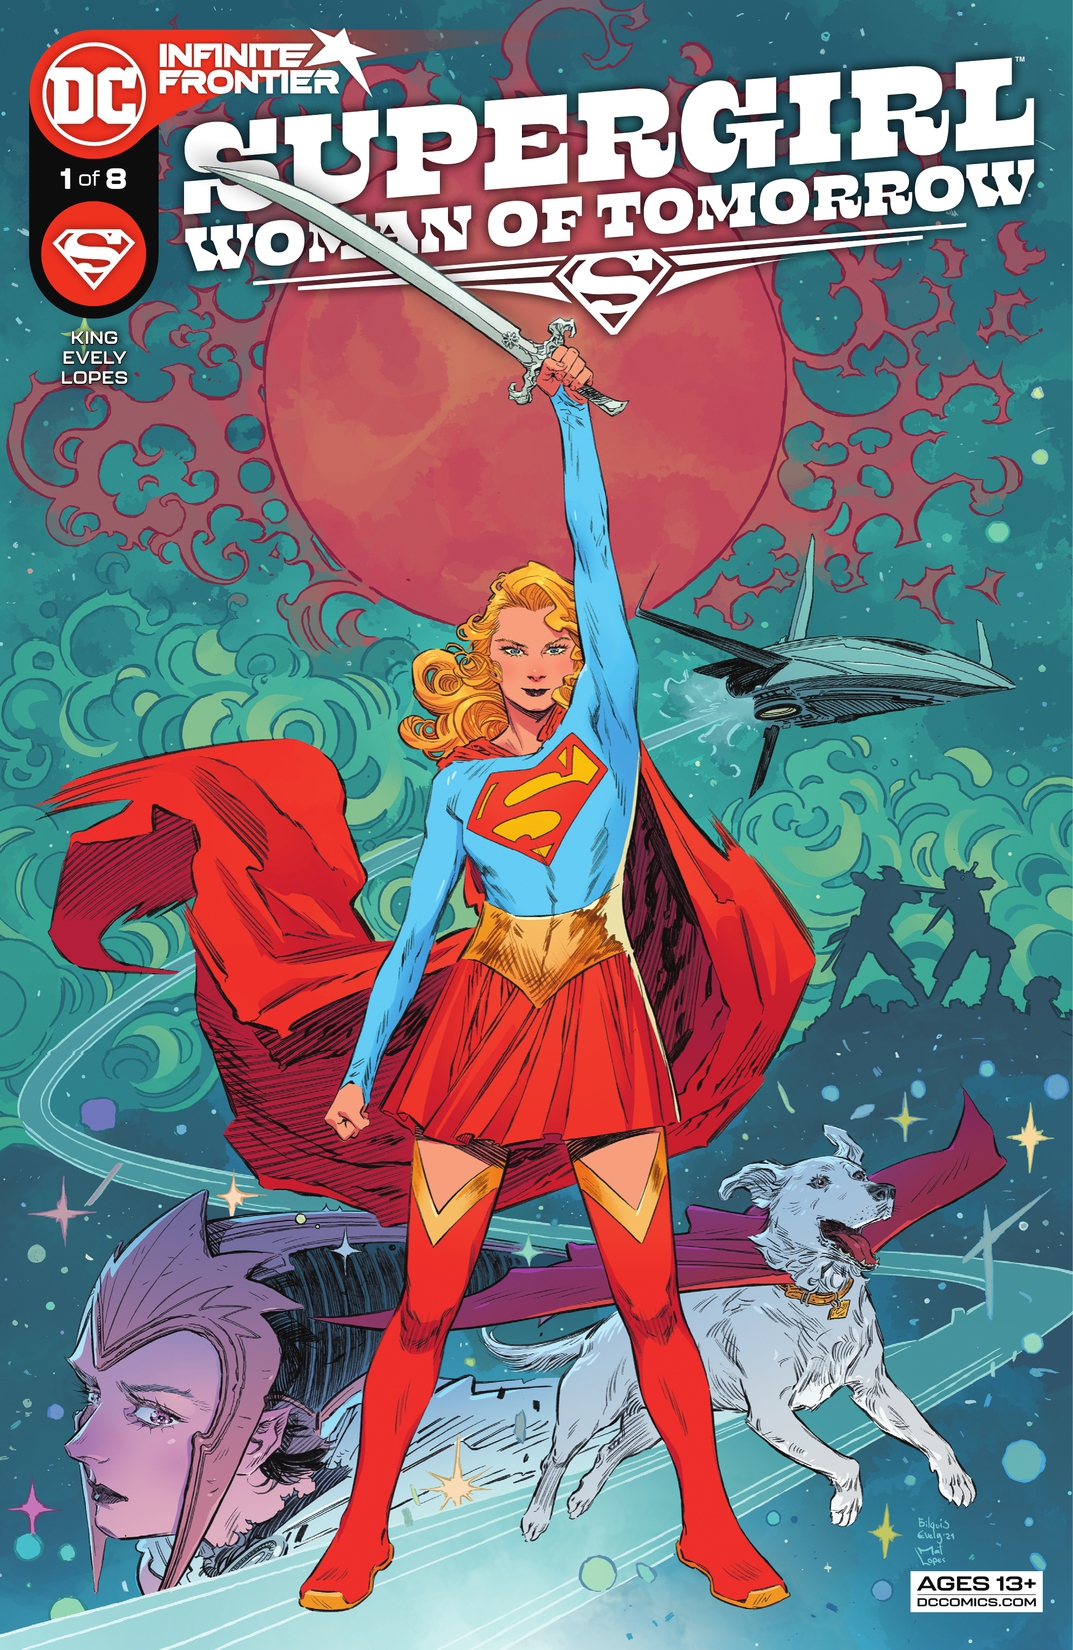 Supergirl: Woman of Tomorrow #1 preview images